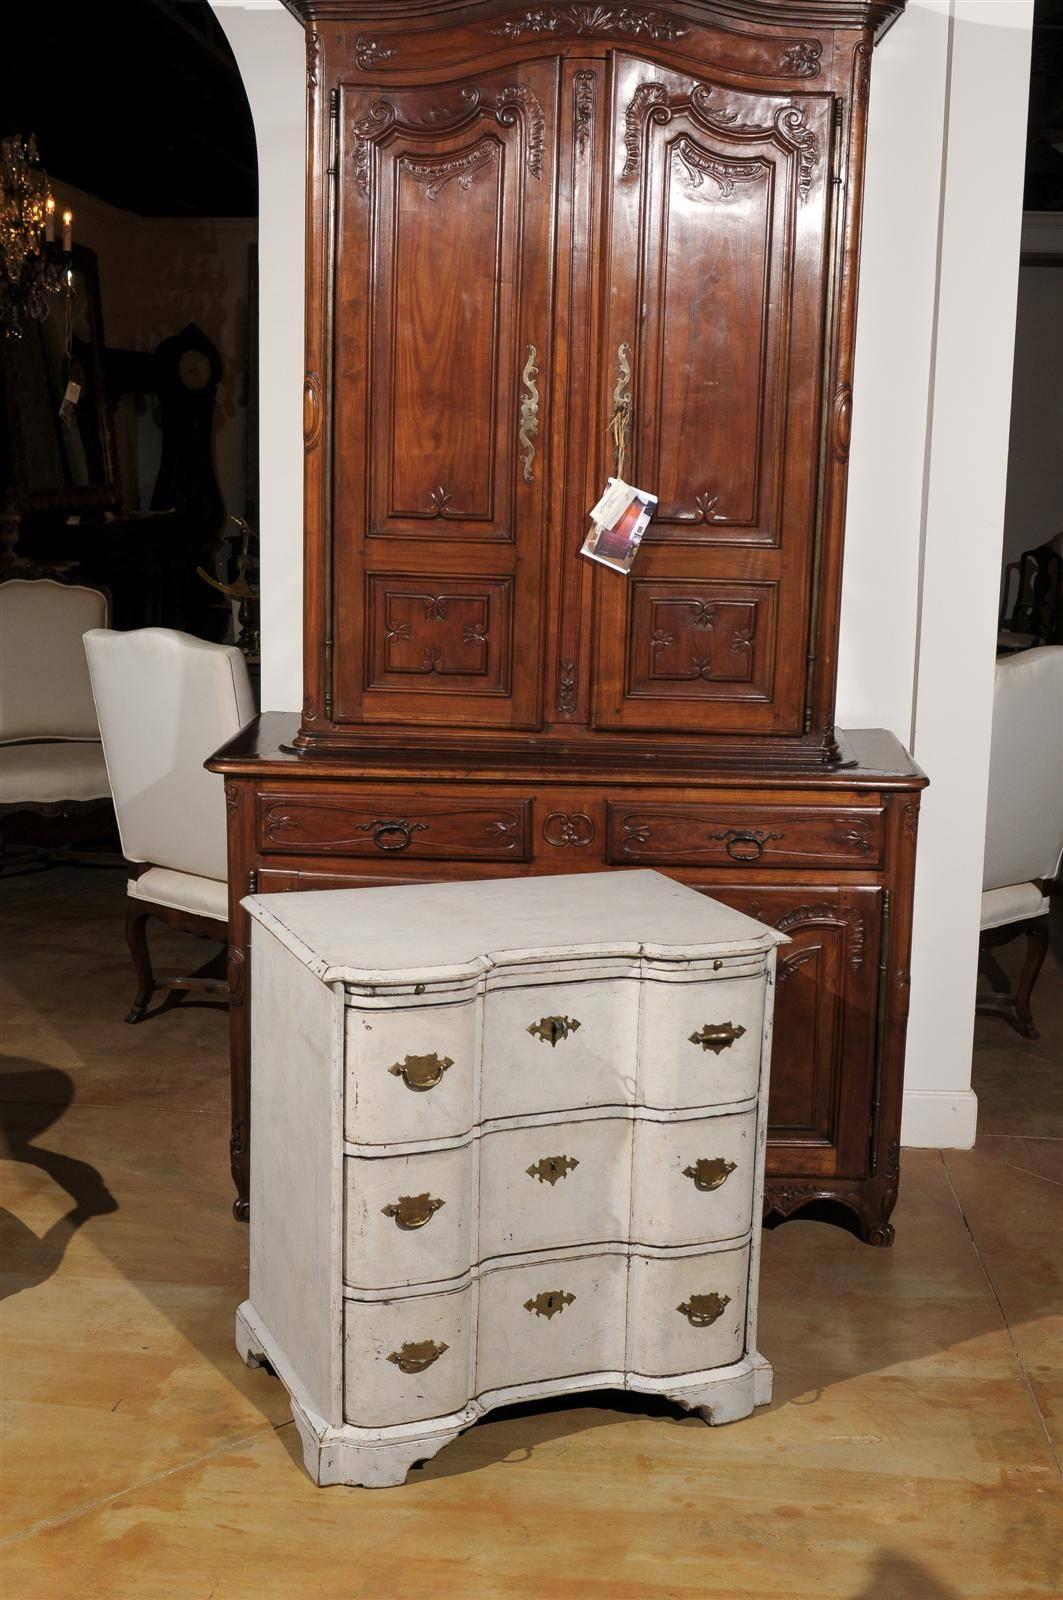 Danish Mid-18th Century Three-Drawer Painted Wood Commode with Serpentine Front In Good Condition For Sale In Atlanta, GA